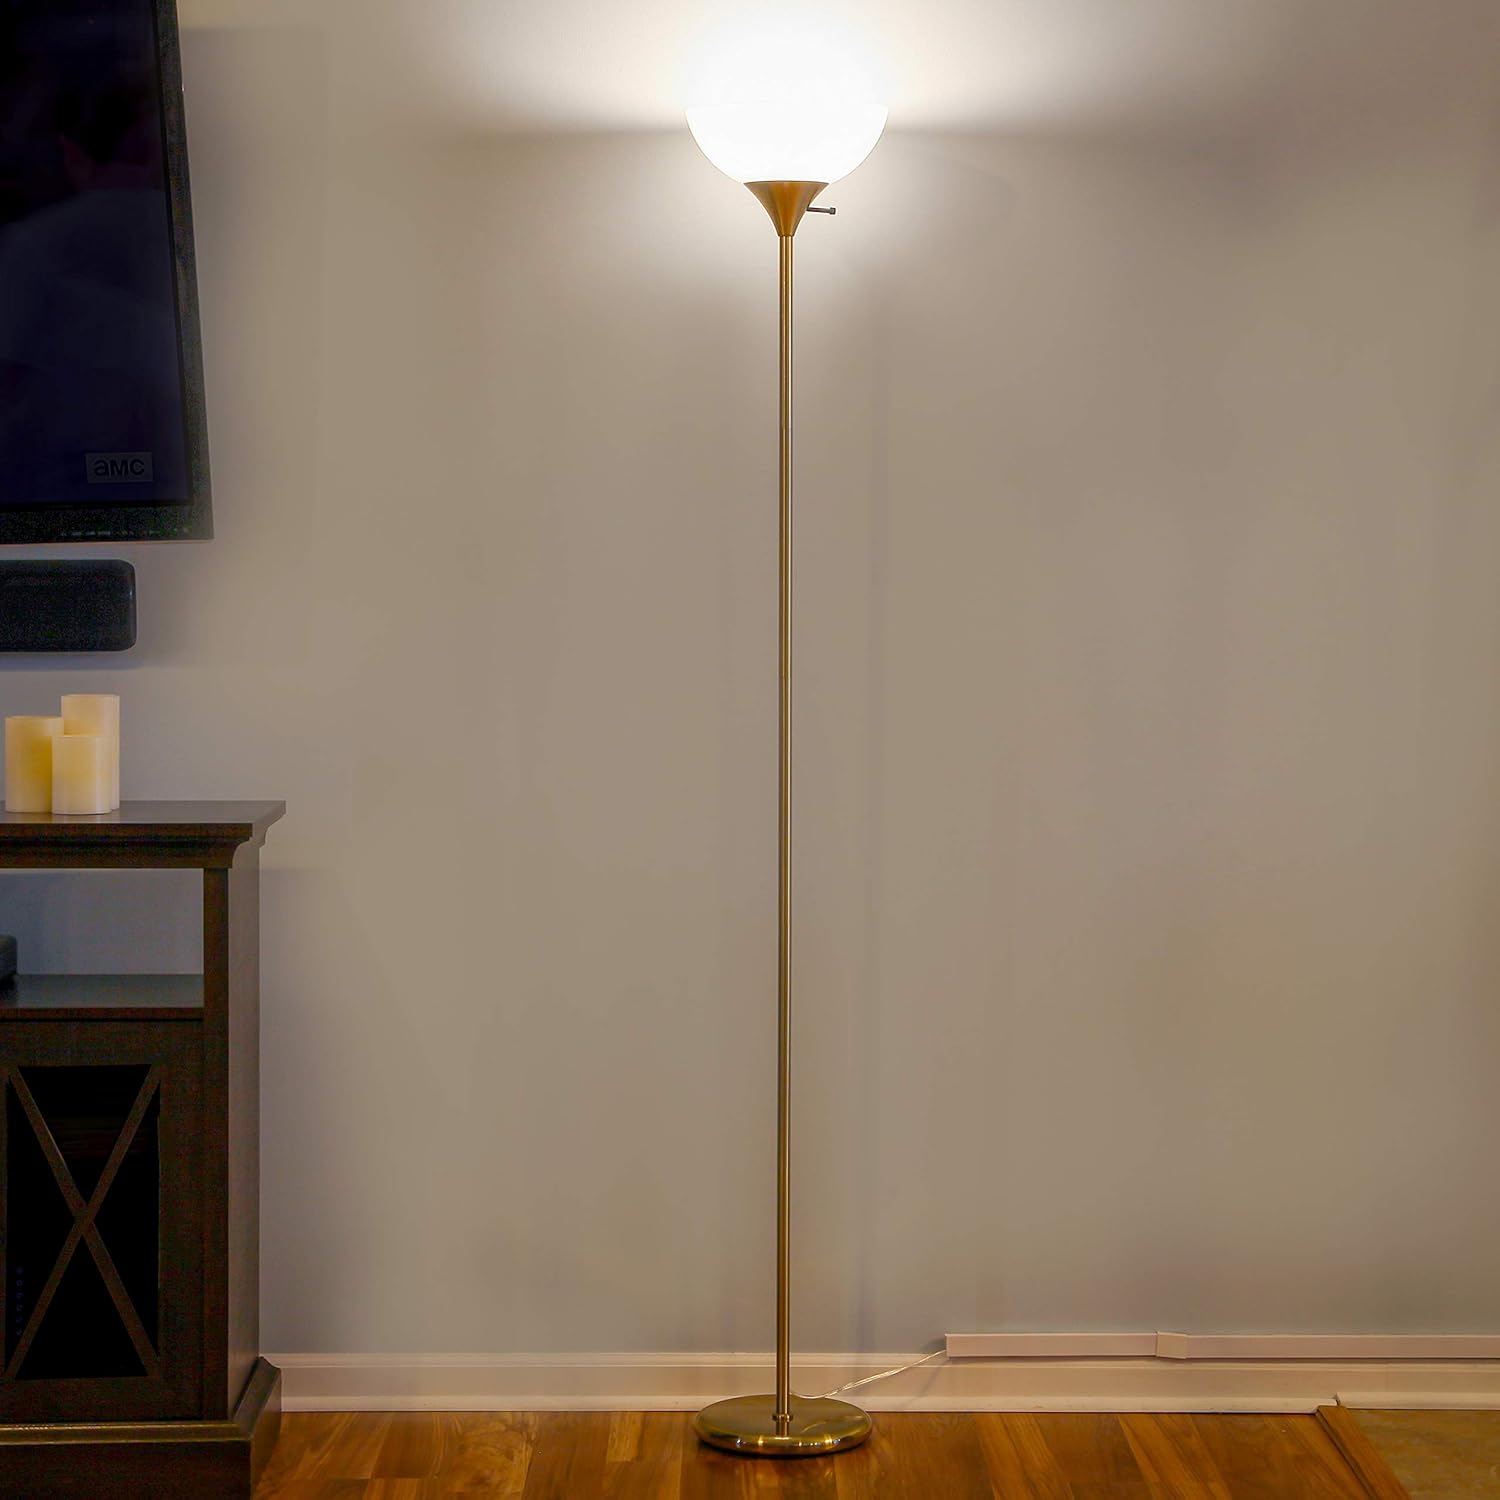 Very Bright Led Torchiere Floor Lamp, Brightech Led Floor Lamp